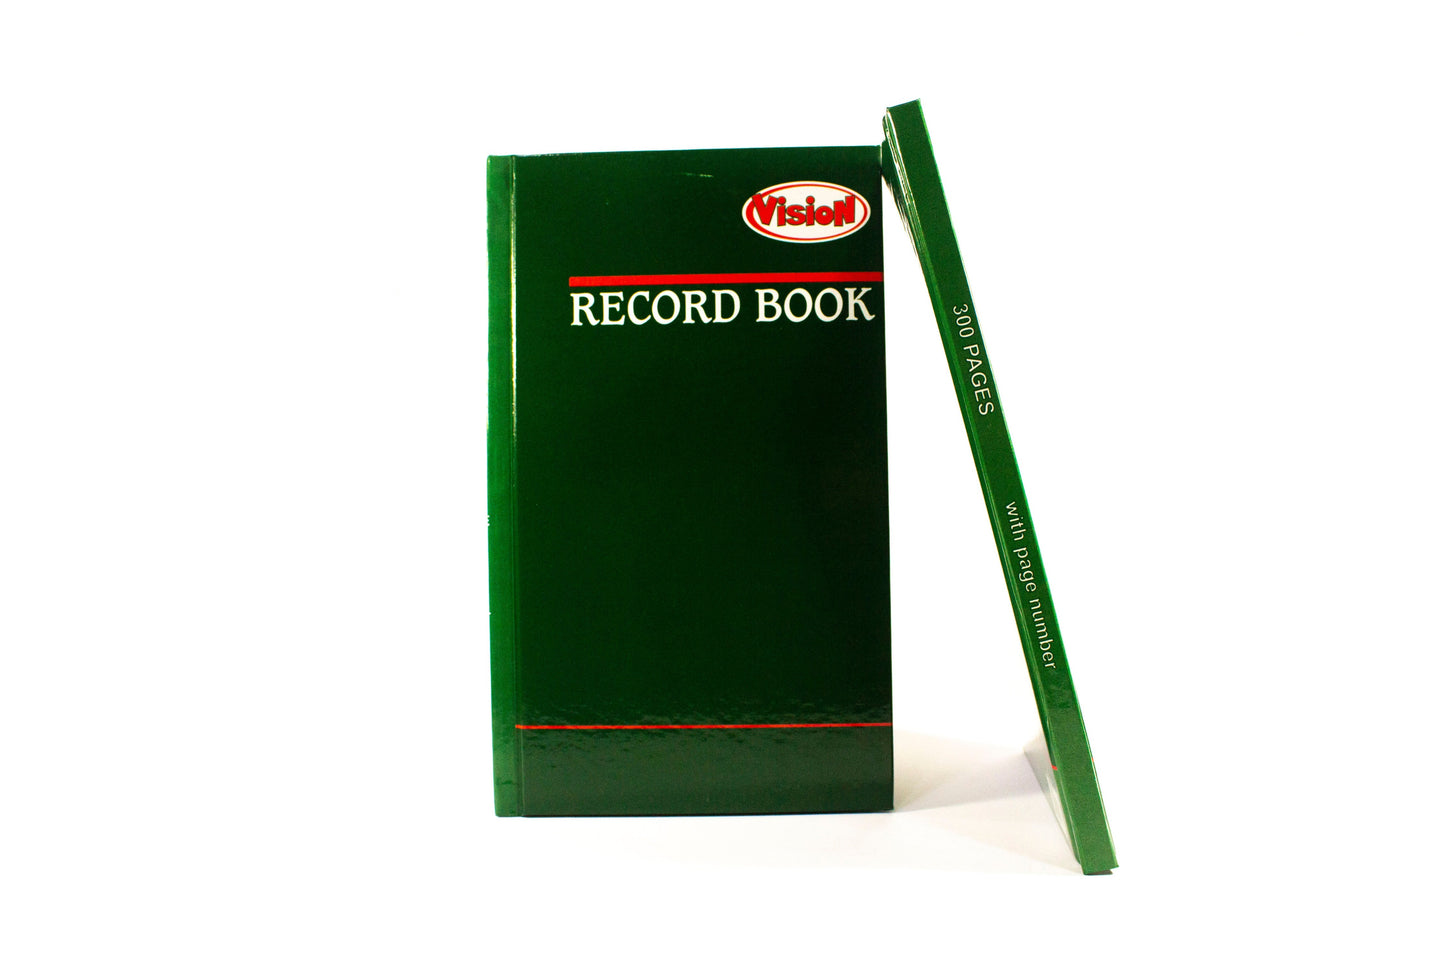 Vision Record Book w/ Page Number 170x280mm l Sold by 10s